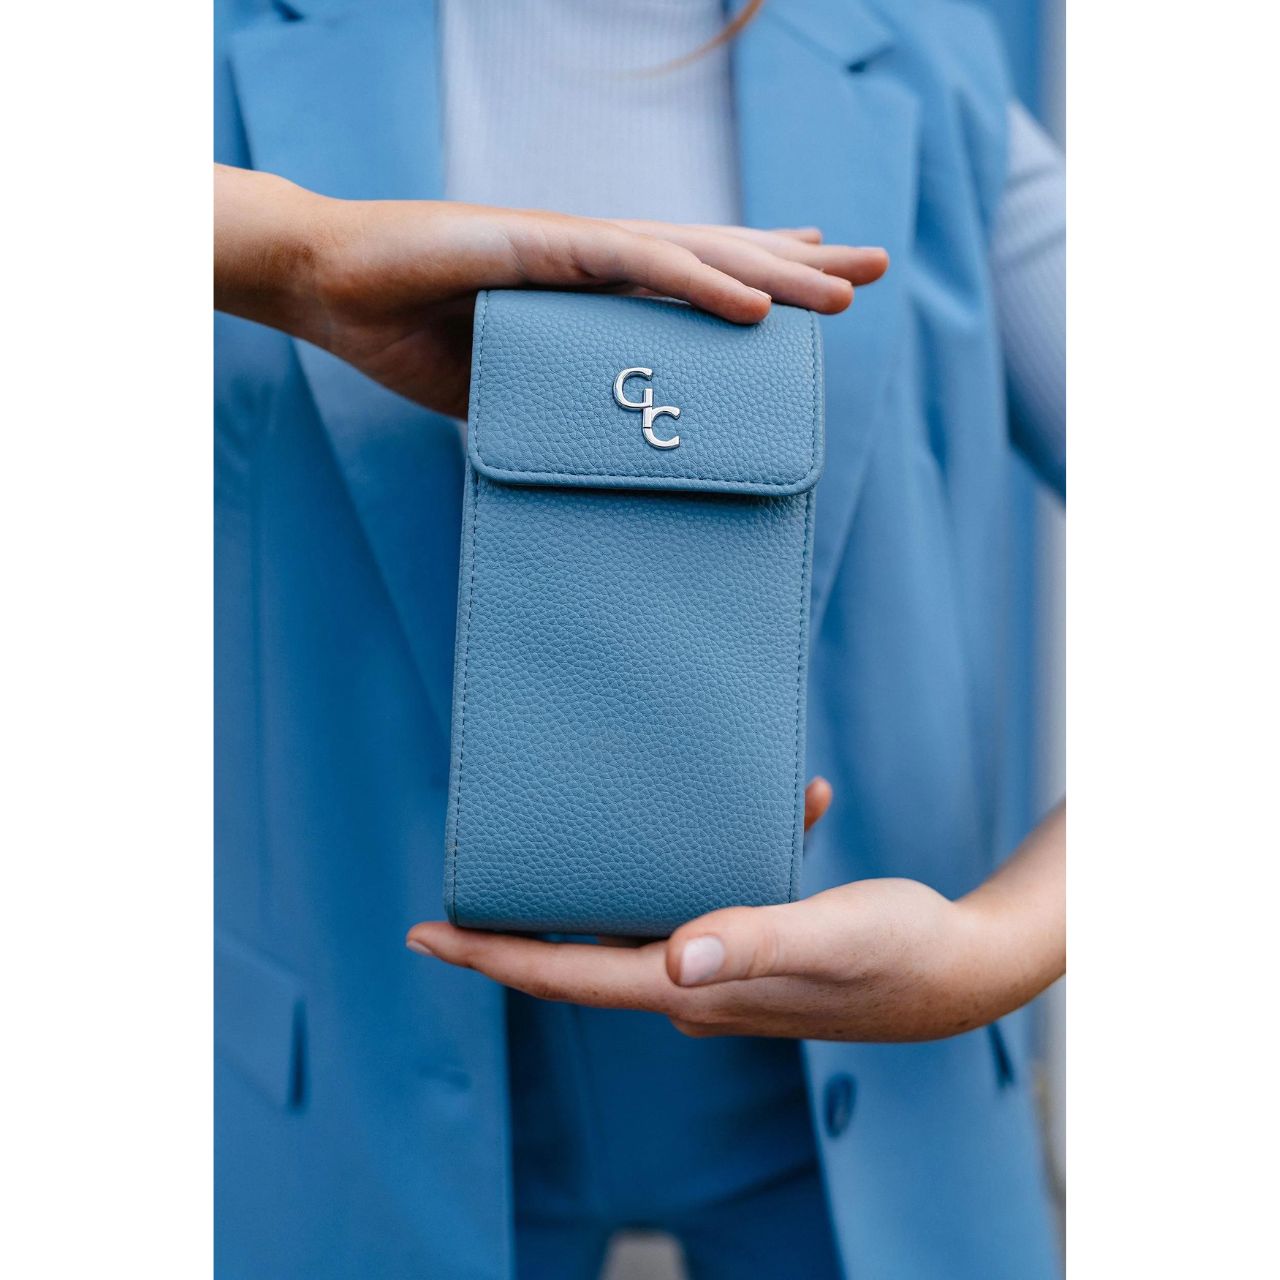 Mini Cross Body Bag - Light Blue by Galway Crystal  Introducing the new must have accessory that is truly functional. Our Light weight, Slim, Sleek, Crossbody bag is designed to hold the most essential accessory: Your mobile phone. There is nothing more liberating than carrying a lightweight bag that carries your essentials.